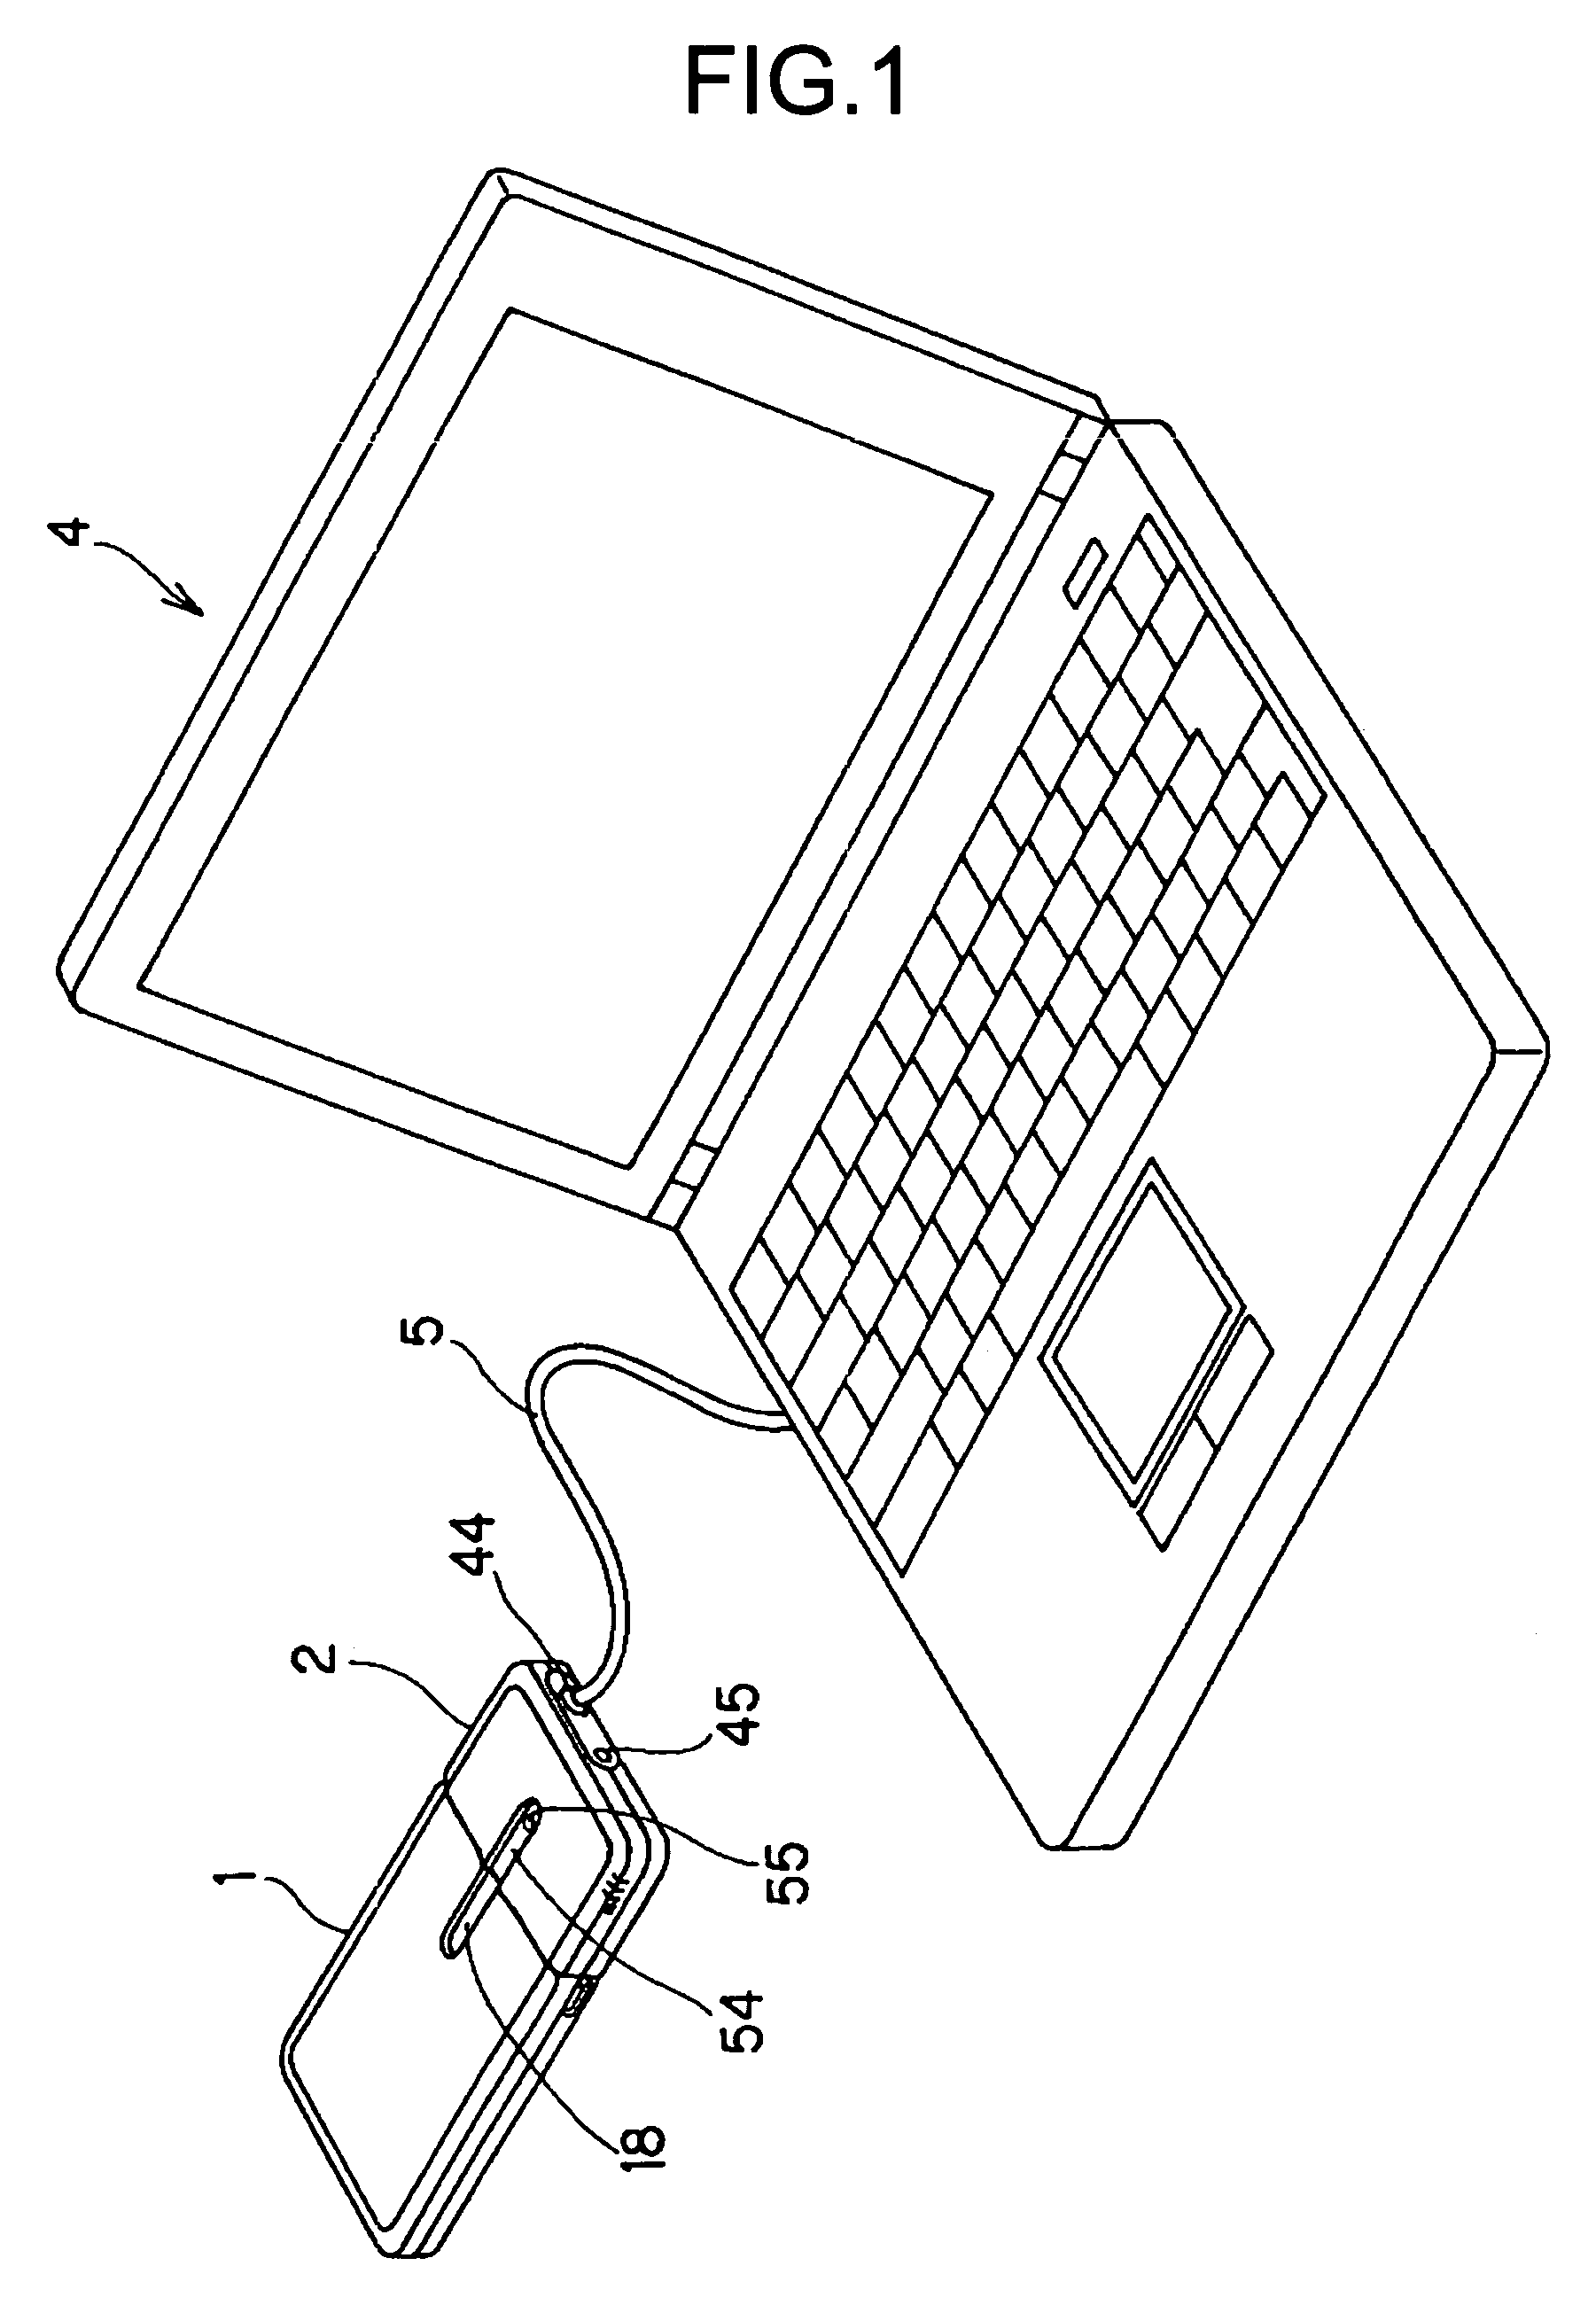 Hard disk system having a hard disk unit and a conversion unit for connection to a host device